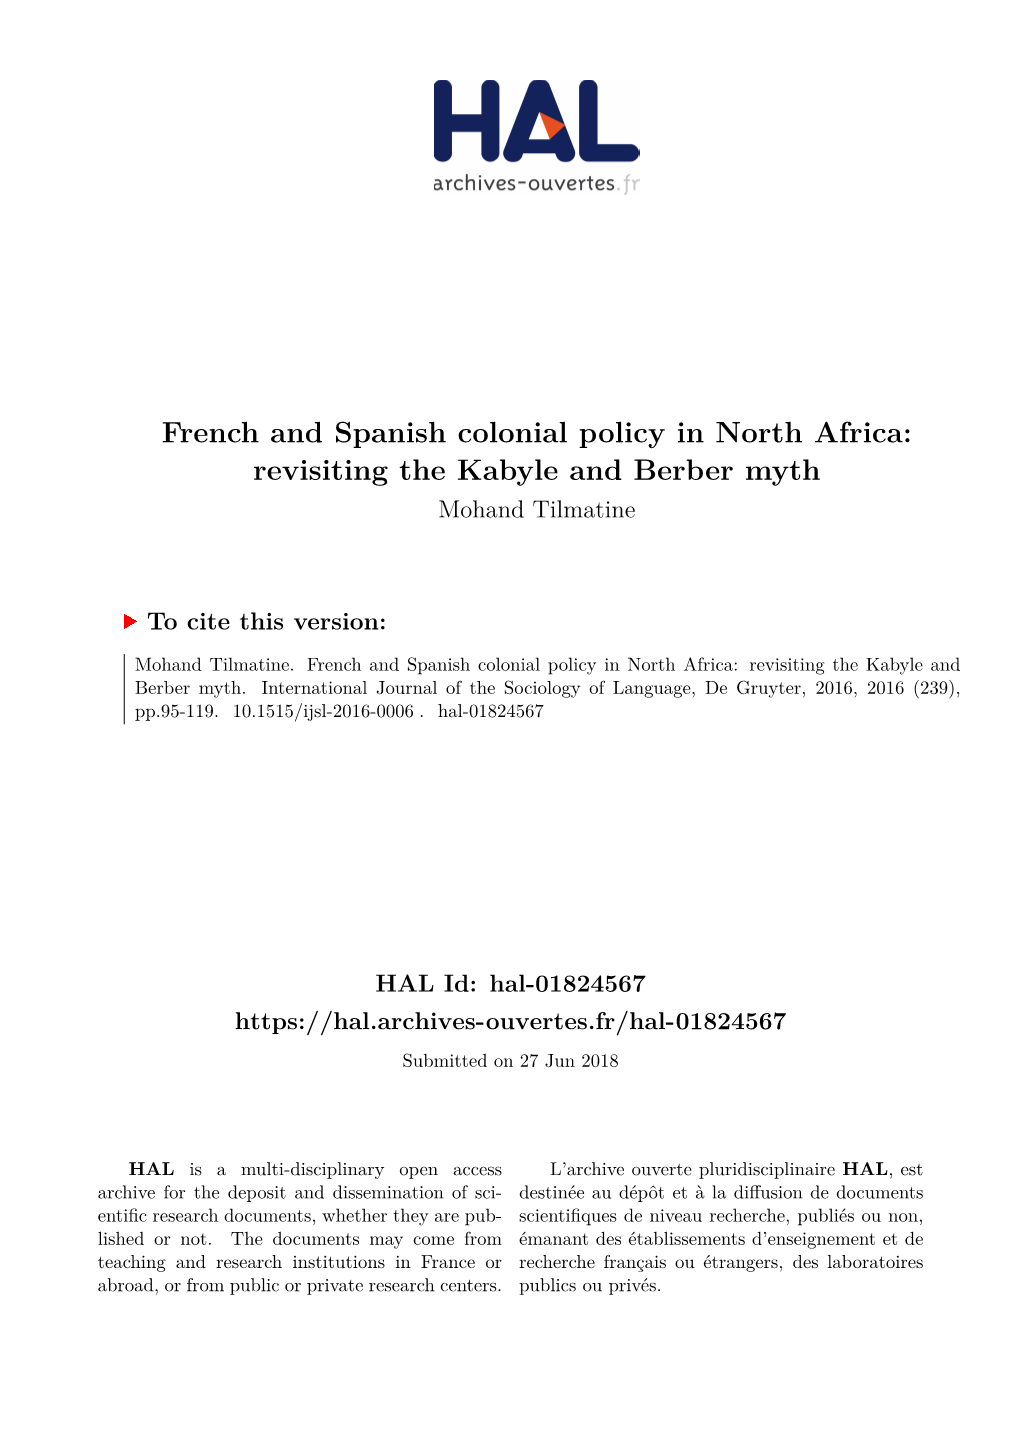 French and Spanish Colonial Policy in North Africa: Revisiting the Kabyle and Berber Myth Mohand Tilmatine